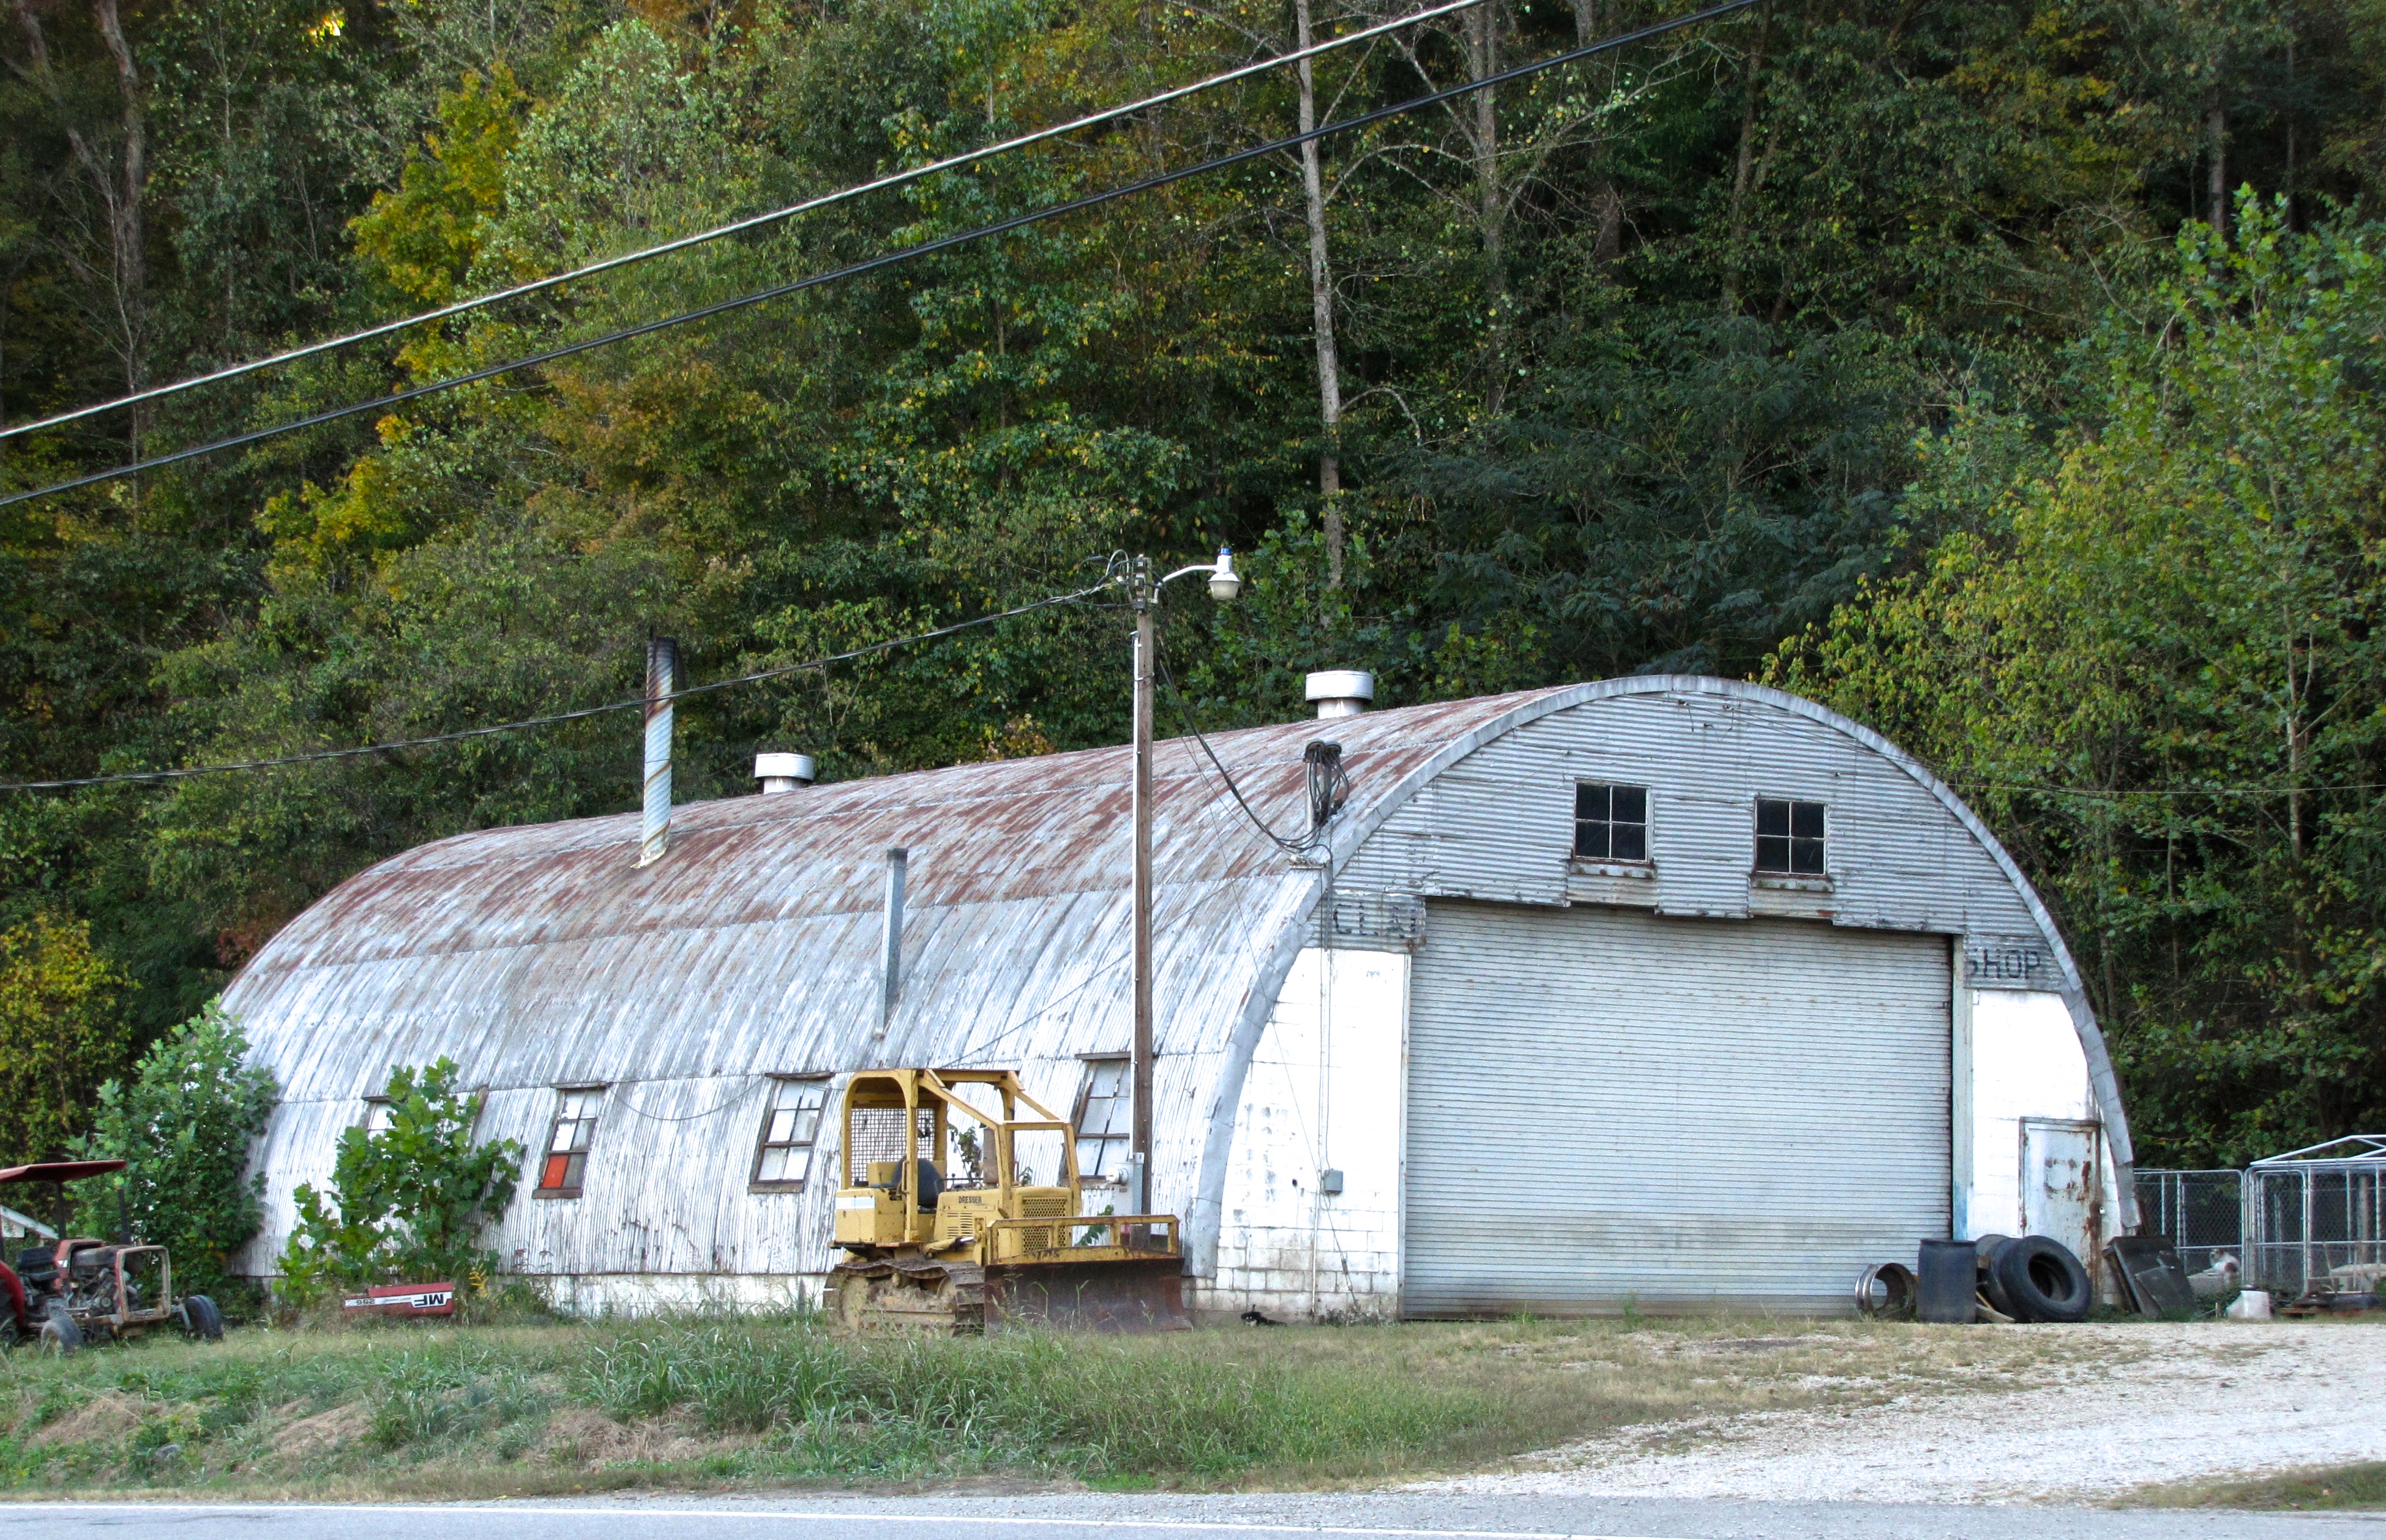 quonset hut in About Us, NY